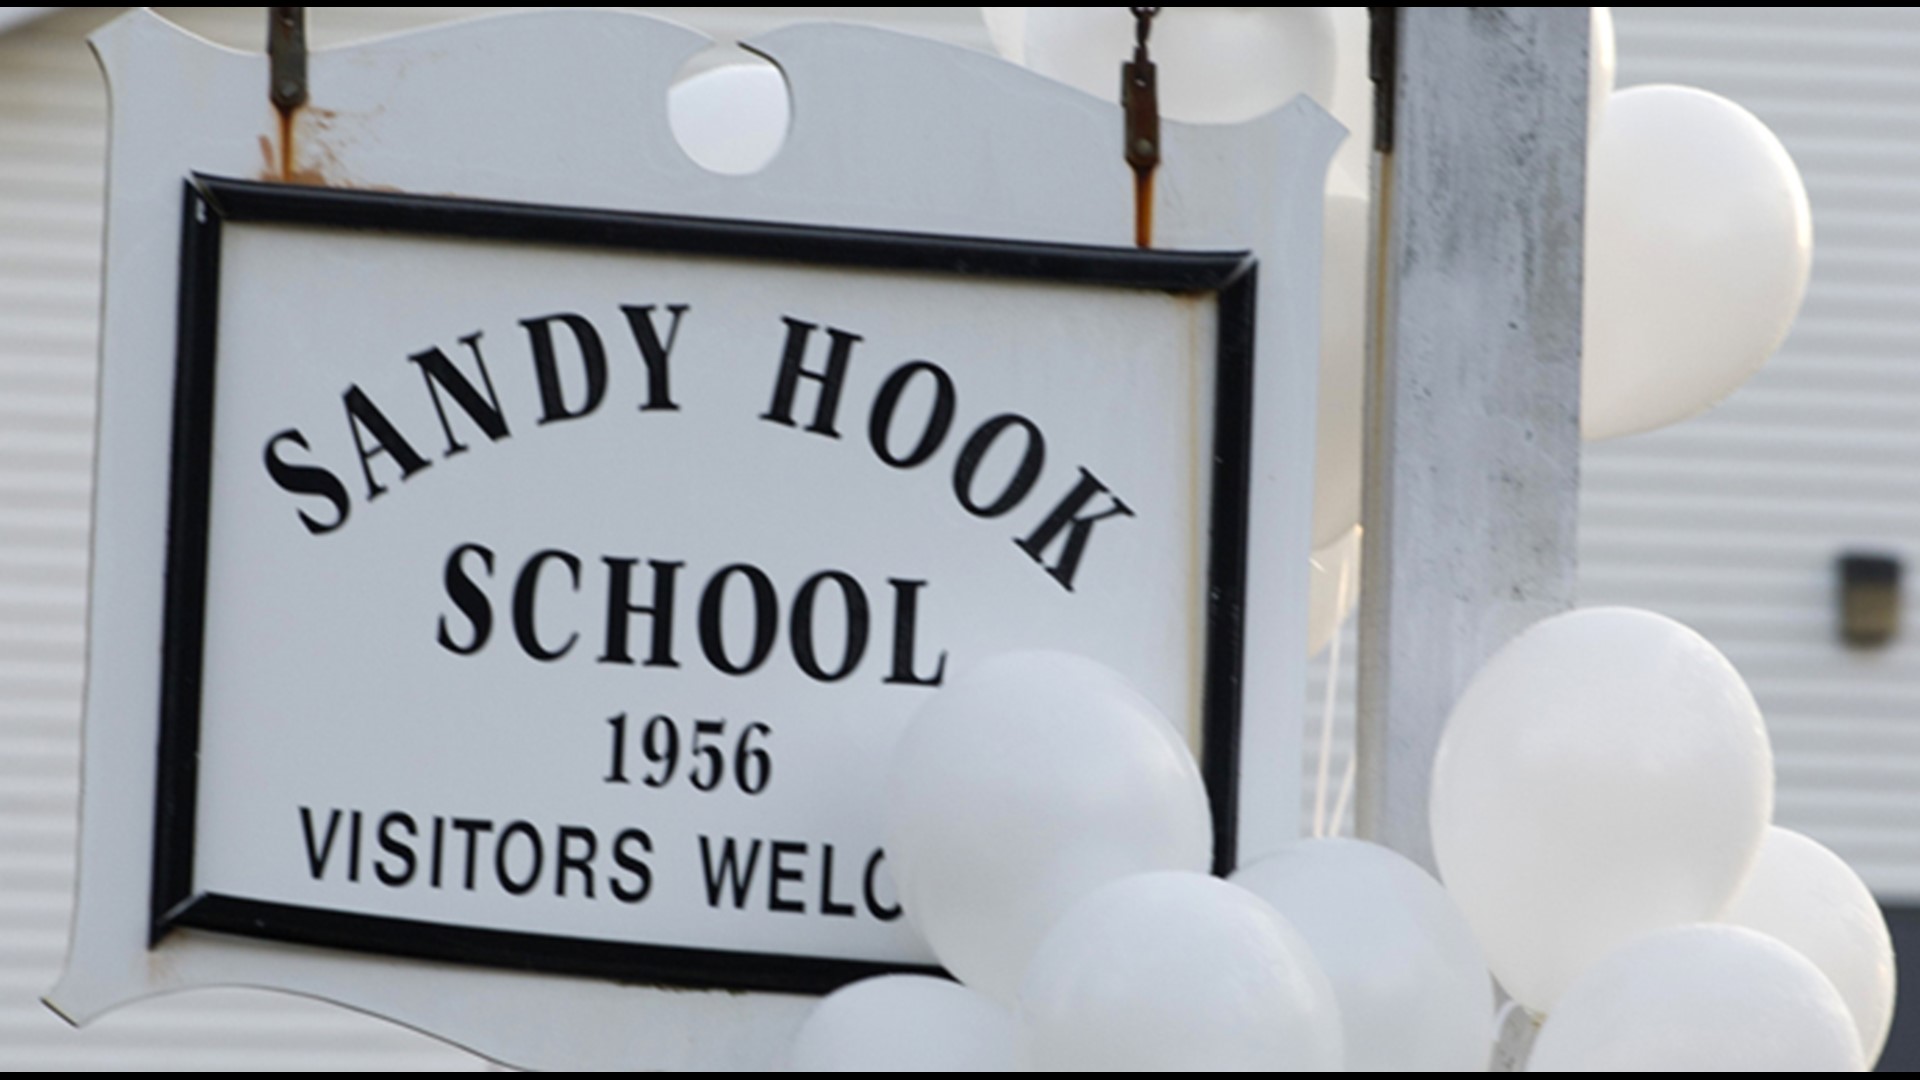 Sandy Hook parents, lawmakers, and advocacy groups have since dedicated their lives to fighting for stricter gun laws across the country.